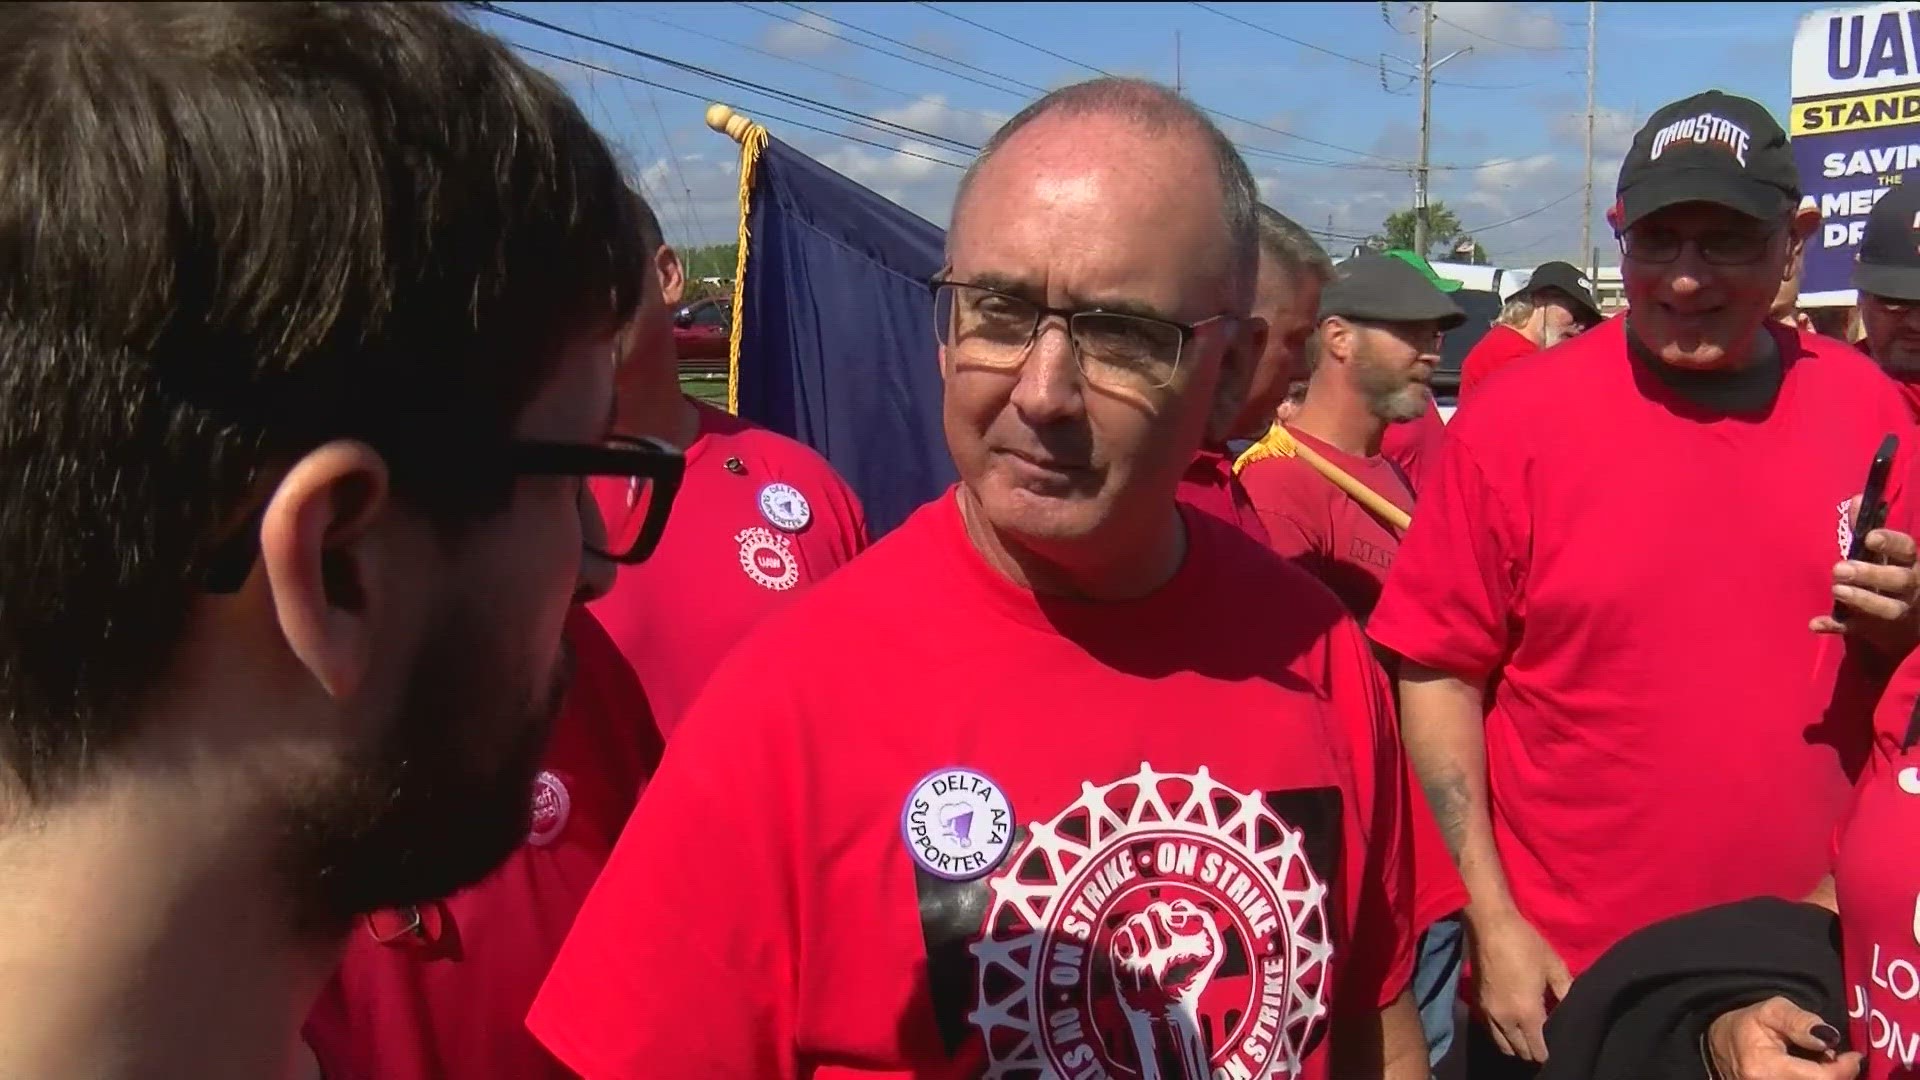 "We're willing to fight as long as it takes," Fain told the crowd at the picket line on Stickney Avenue on Saturday.